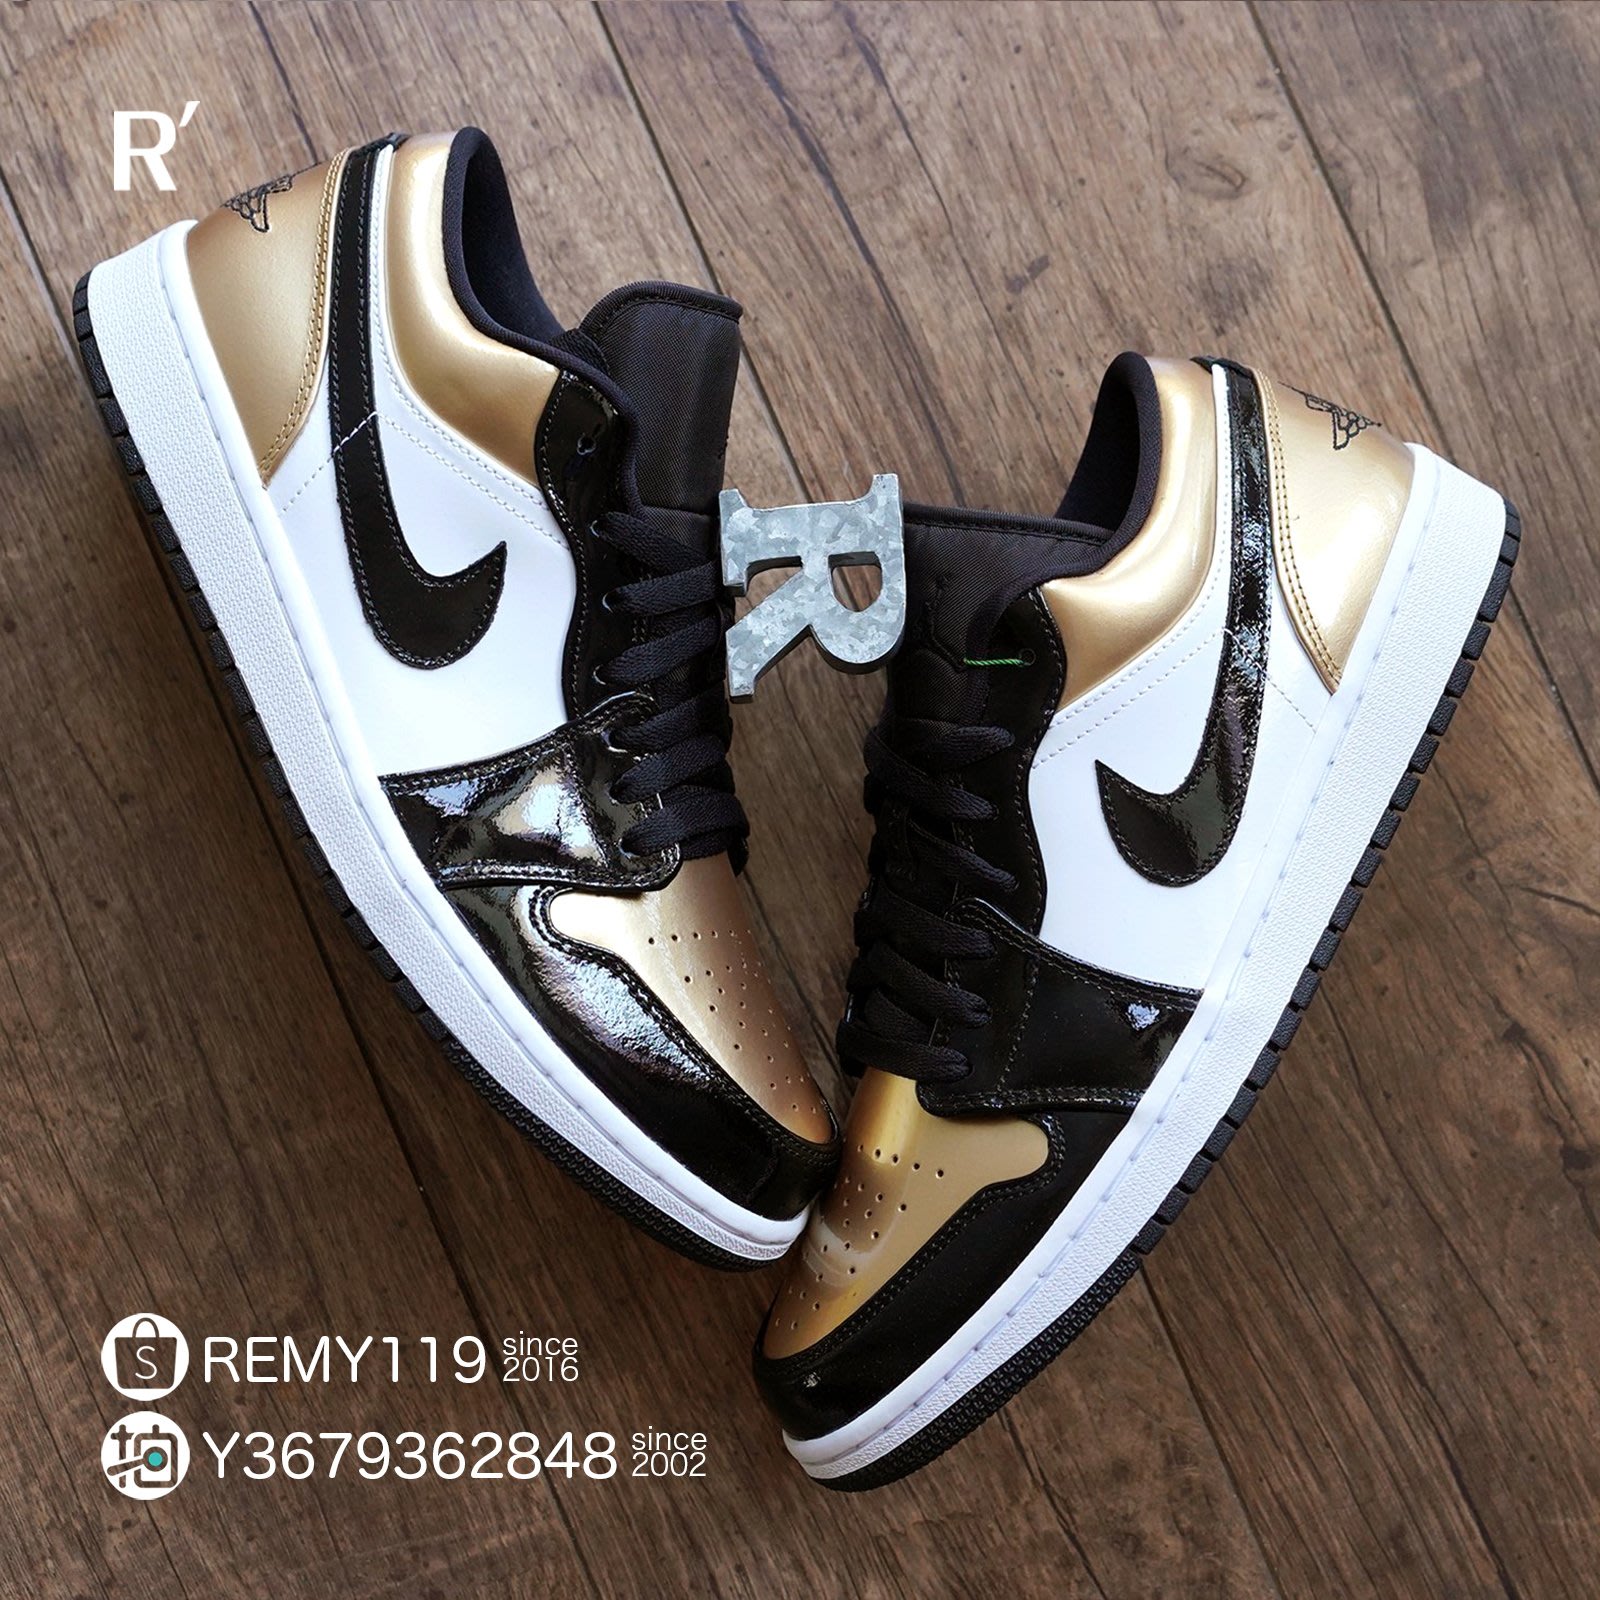 gold toe 1 low